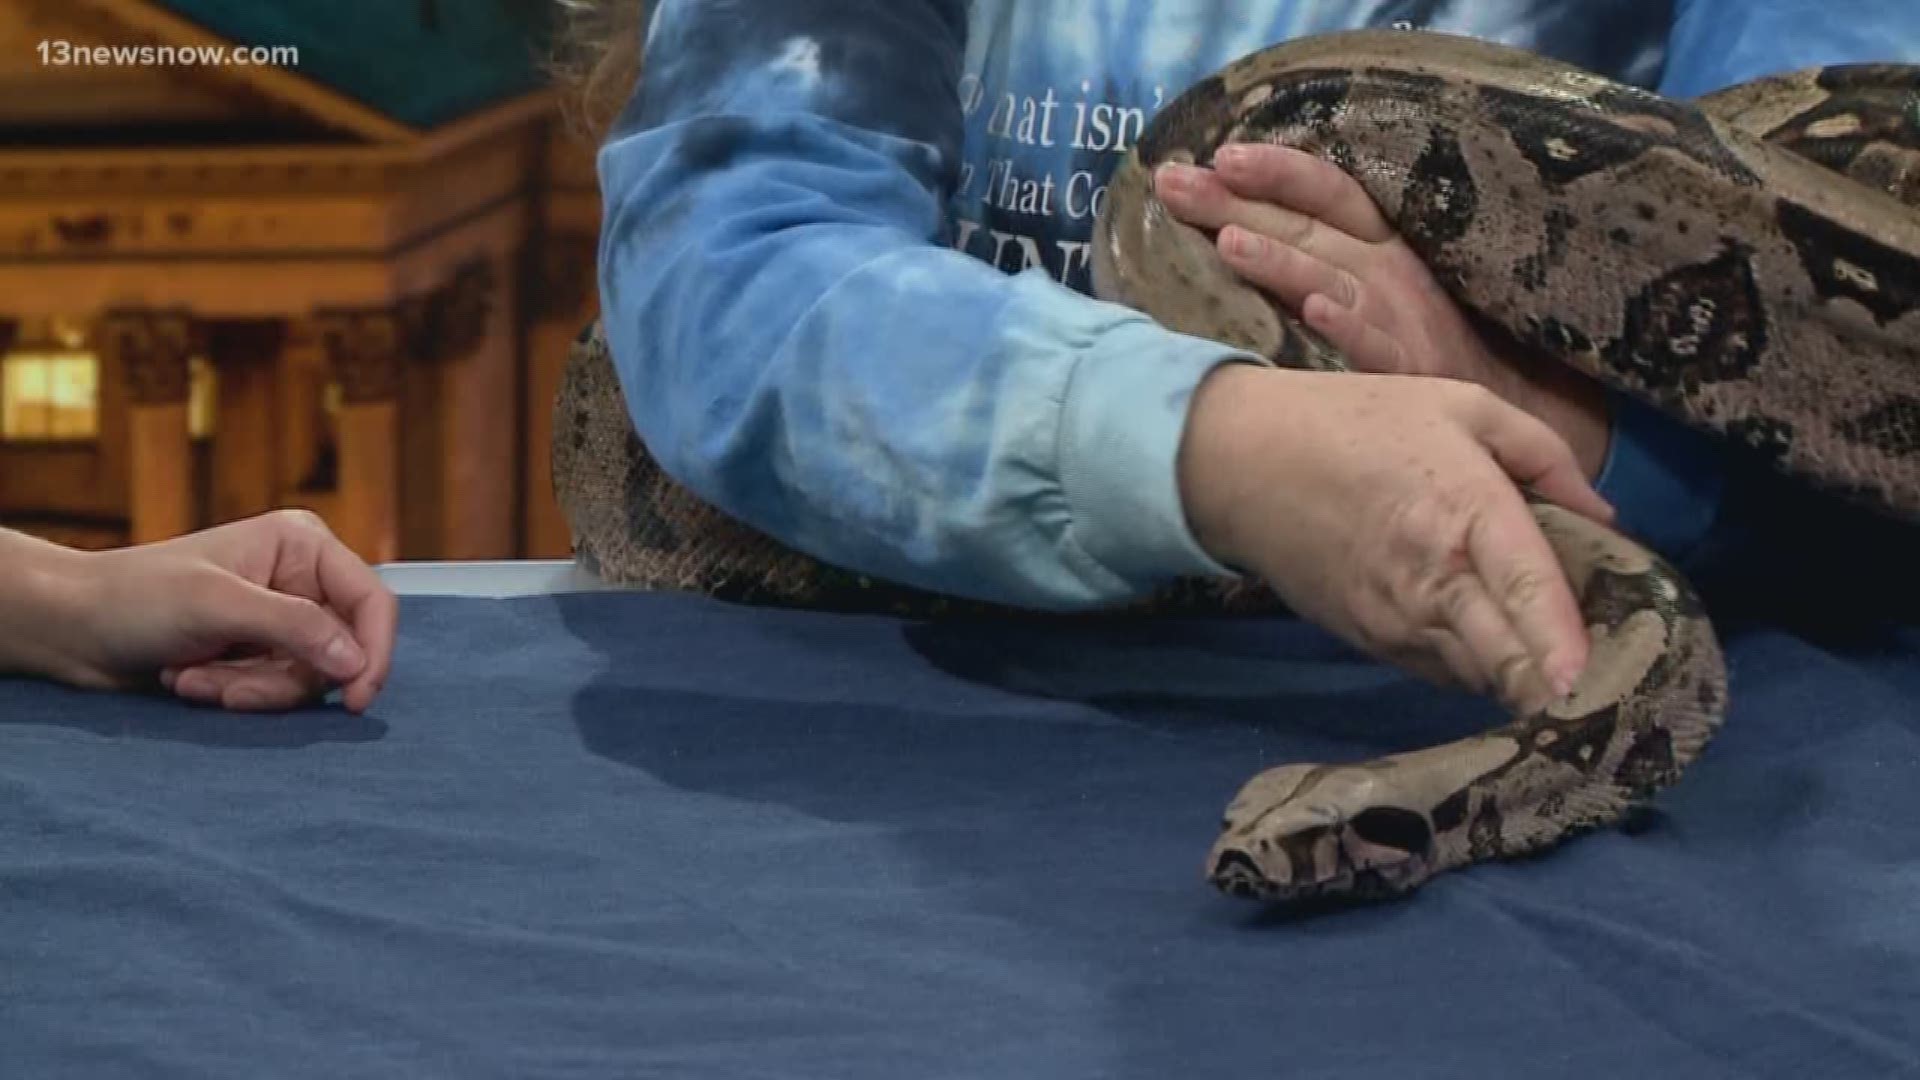 Scarlet the snake is not up adoption and comes from The Bunny Hutch in Virginia Beach.